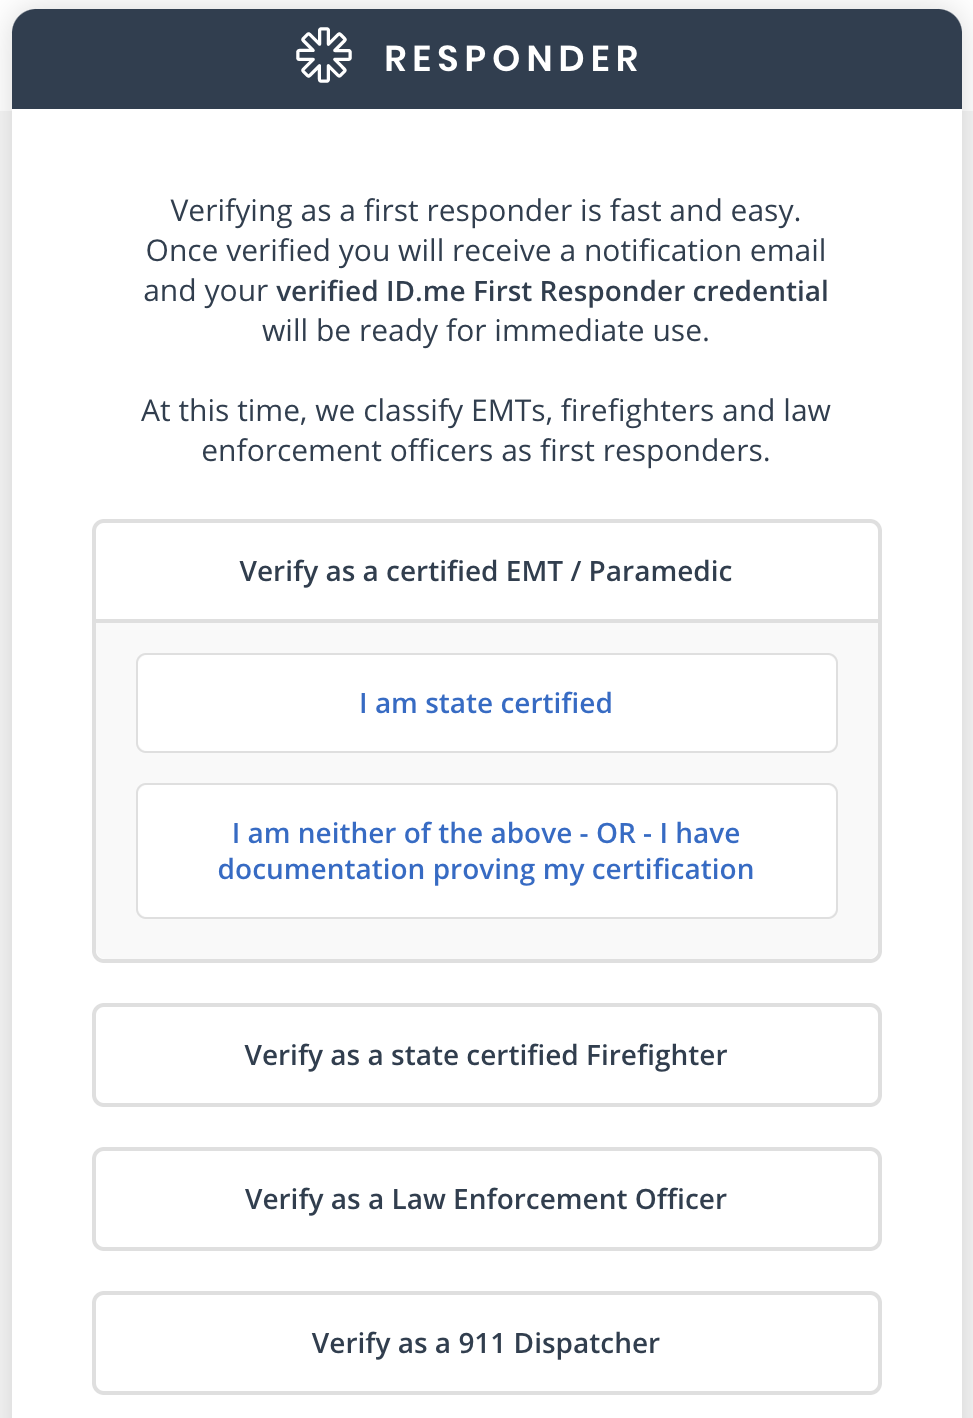 What is EMS reference number?